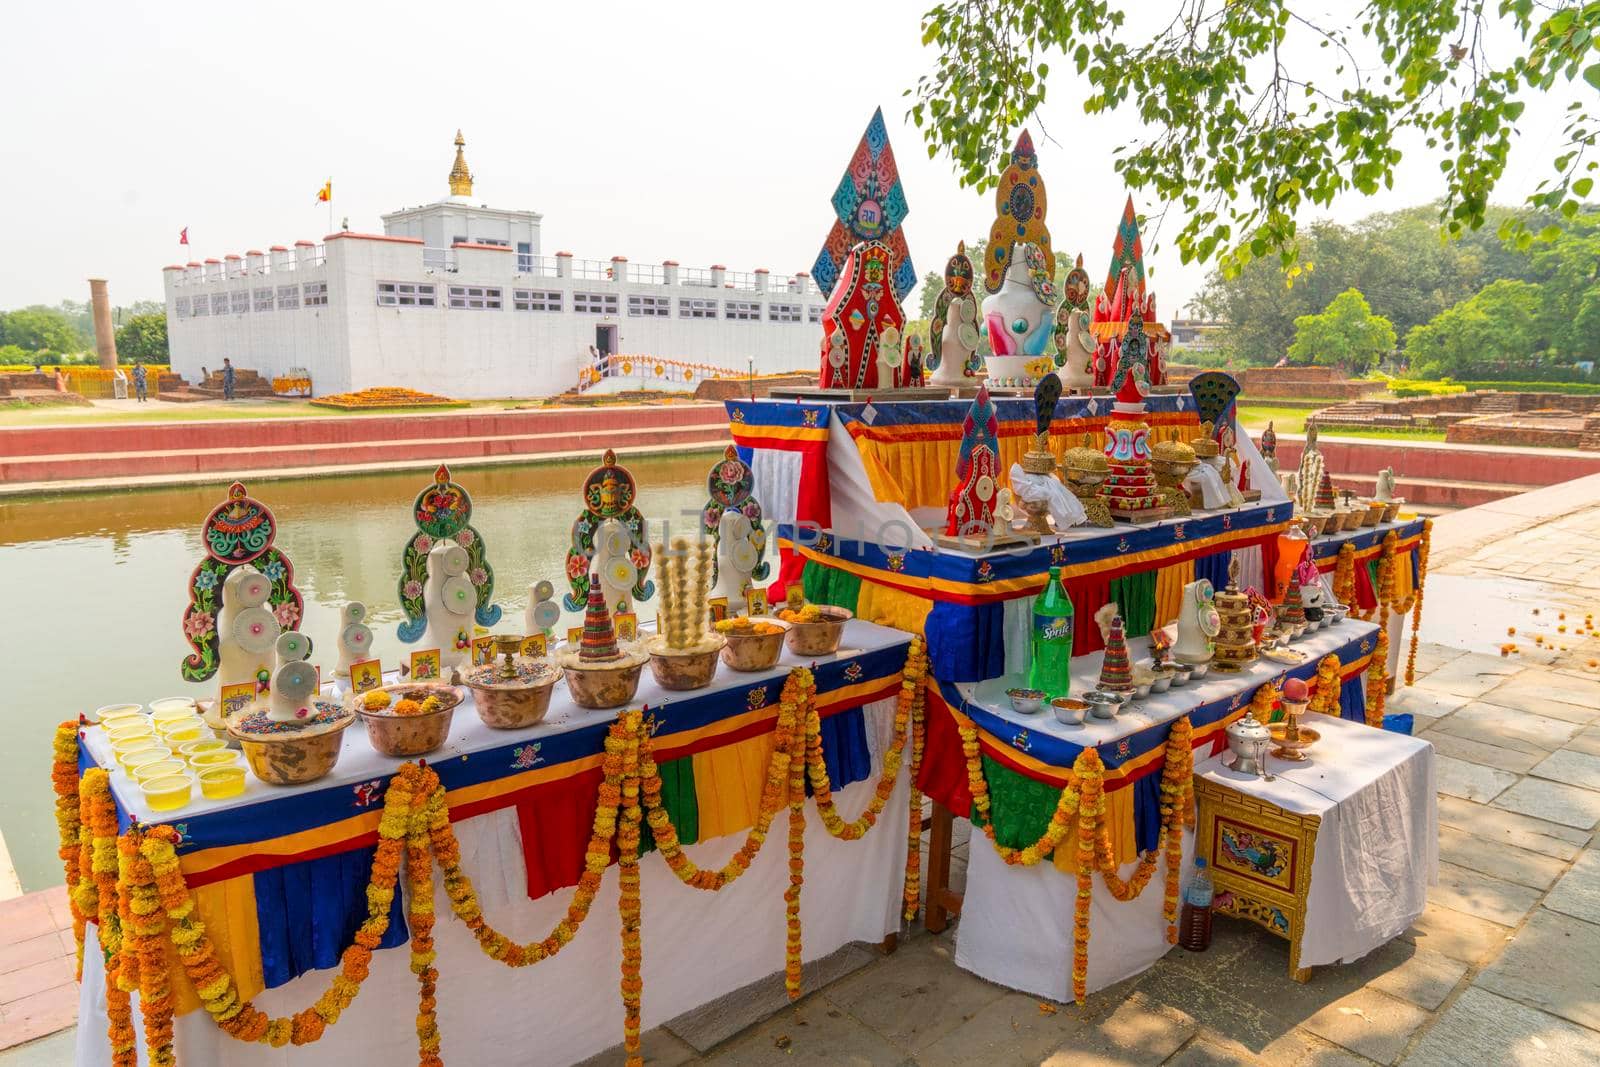 Buddha birthplace in Lumbini and buddhist offerings near sacred pond. Captured in Nepal, spring 2018